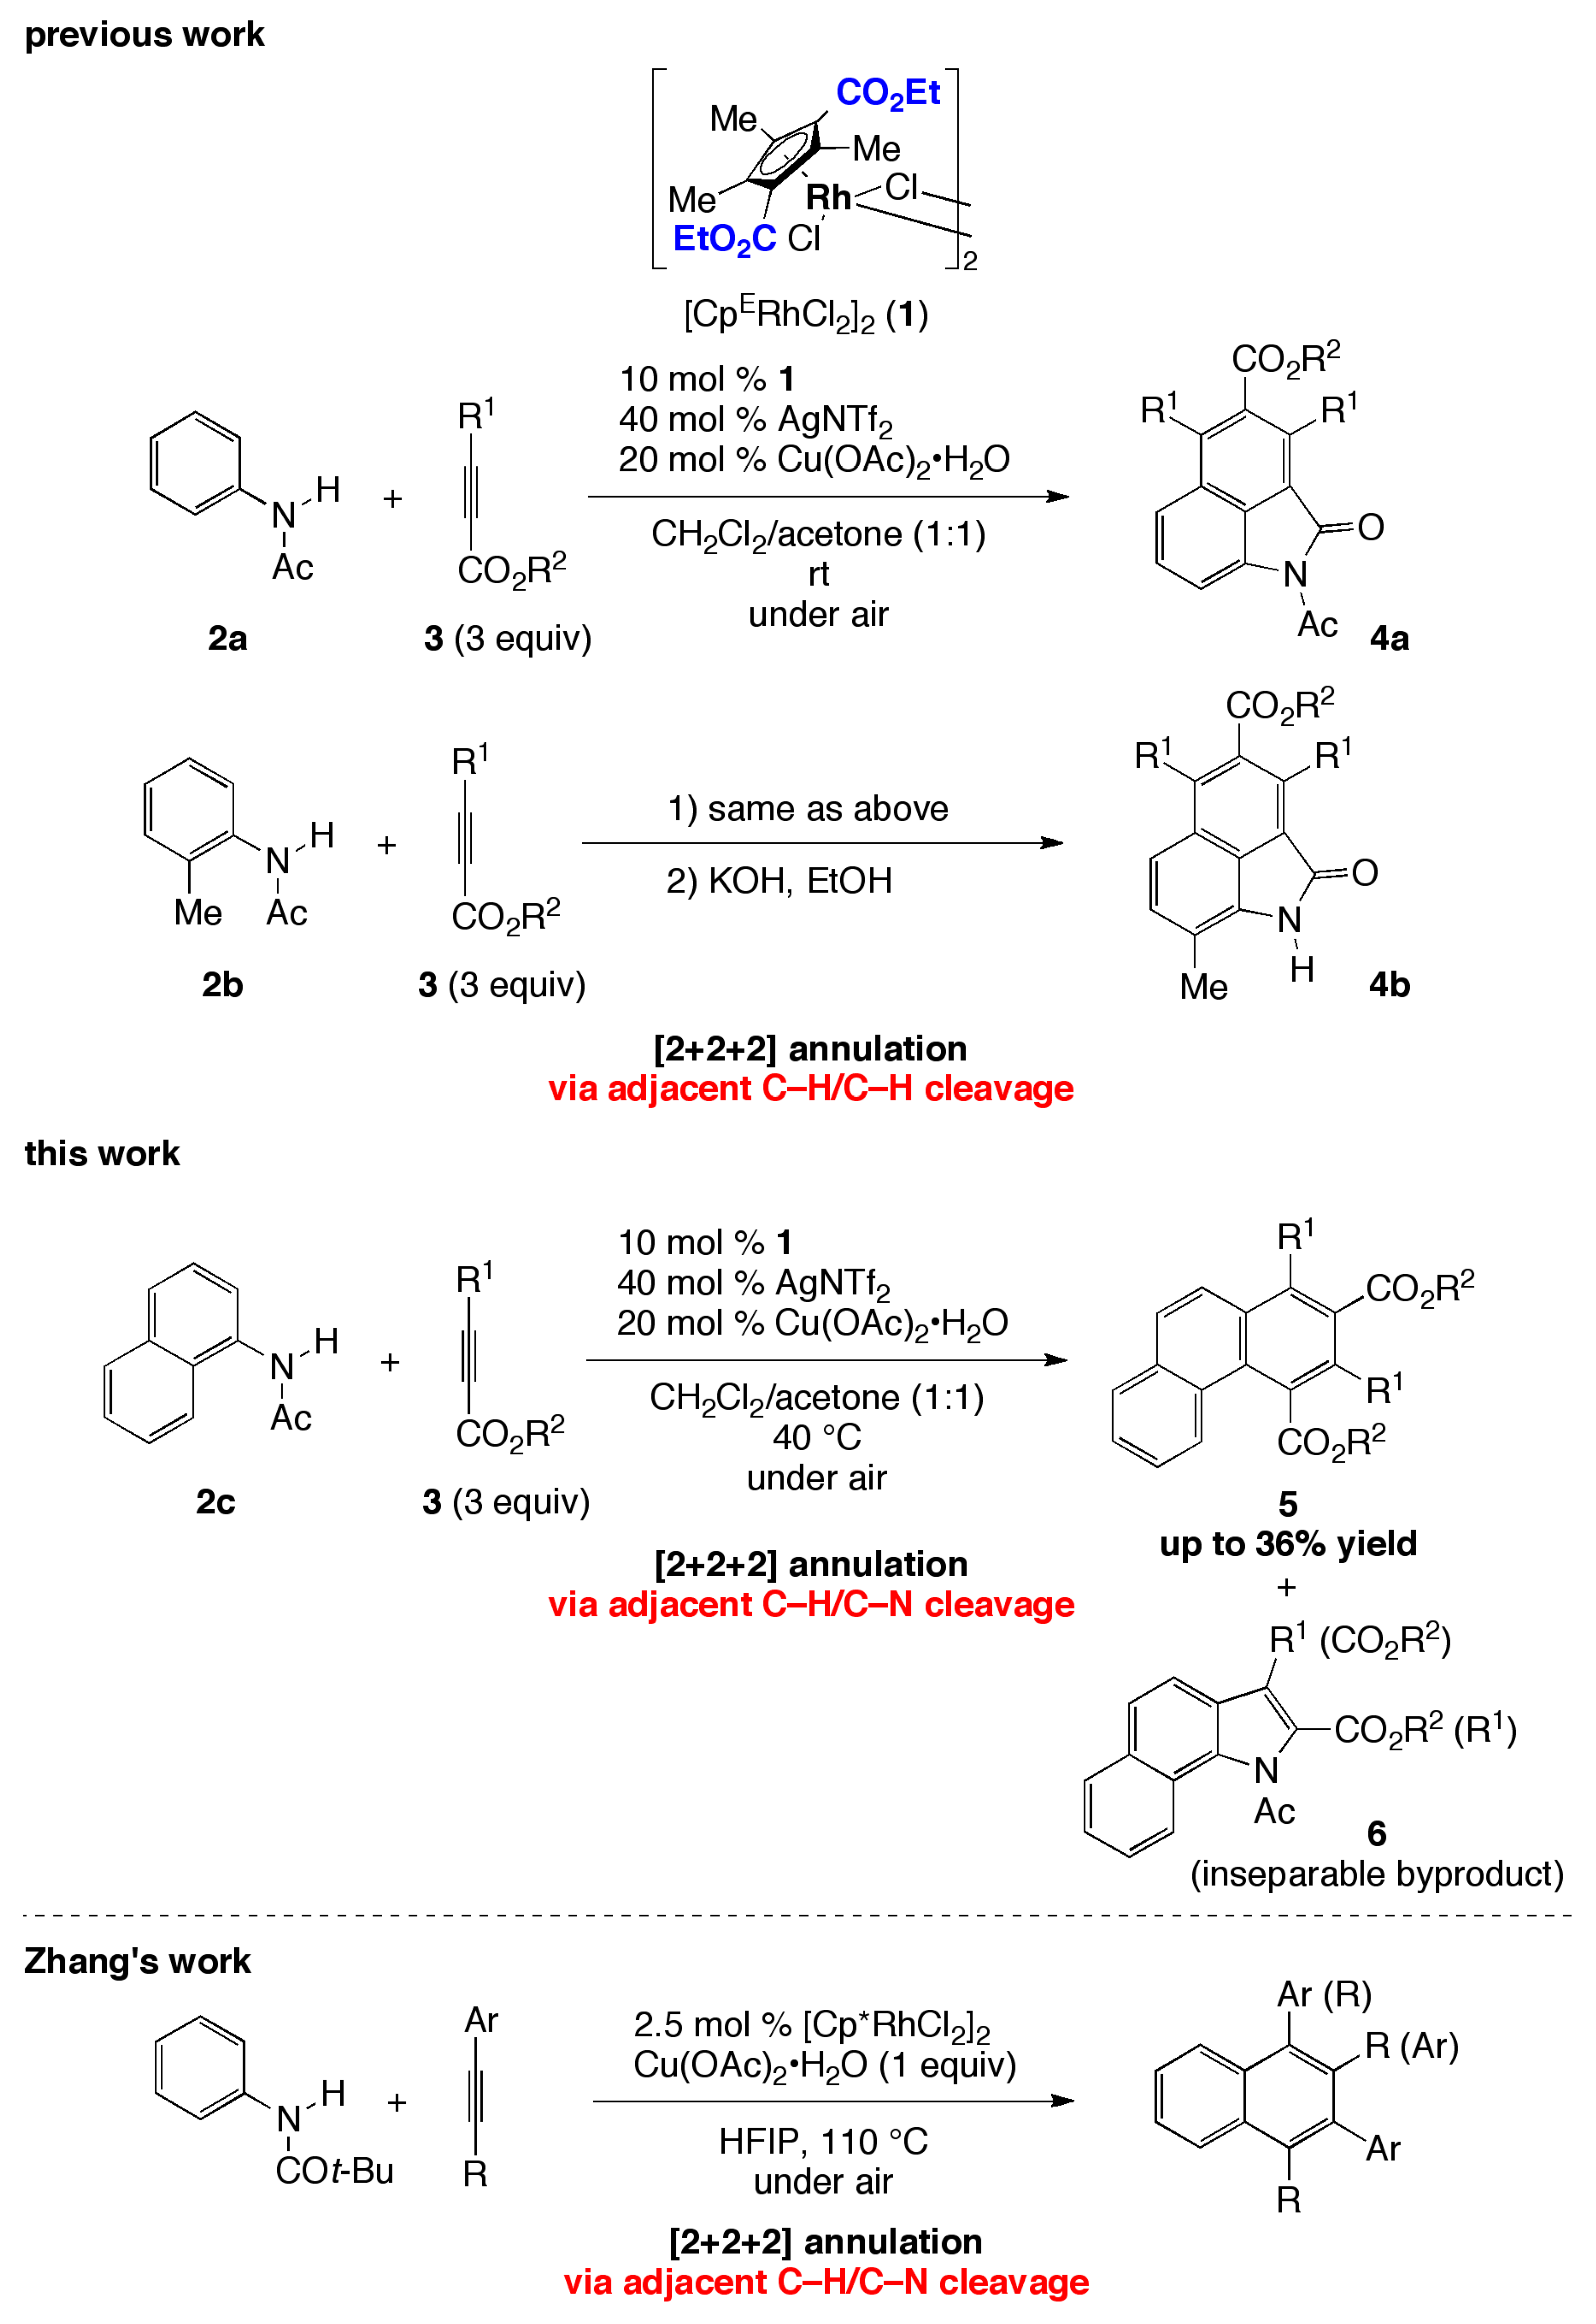 Molecules Free Full Text 2 2 2 Annulation Of N 1 Naphthyl Acetamide With Two Alkynoates Via Cleavage Of Adjacent C H And C N Bonds Catalyzed By An Electron Deficient Rhodium Iii Complex Html